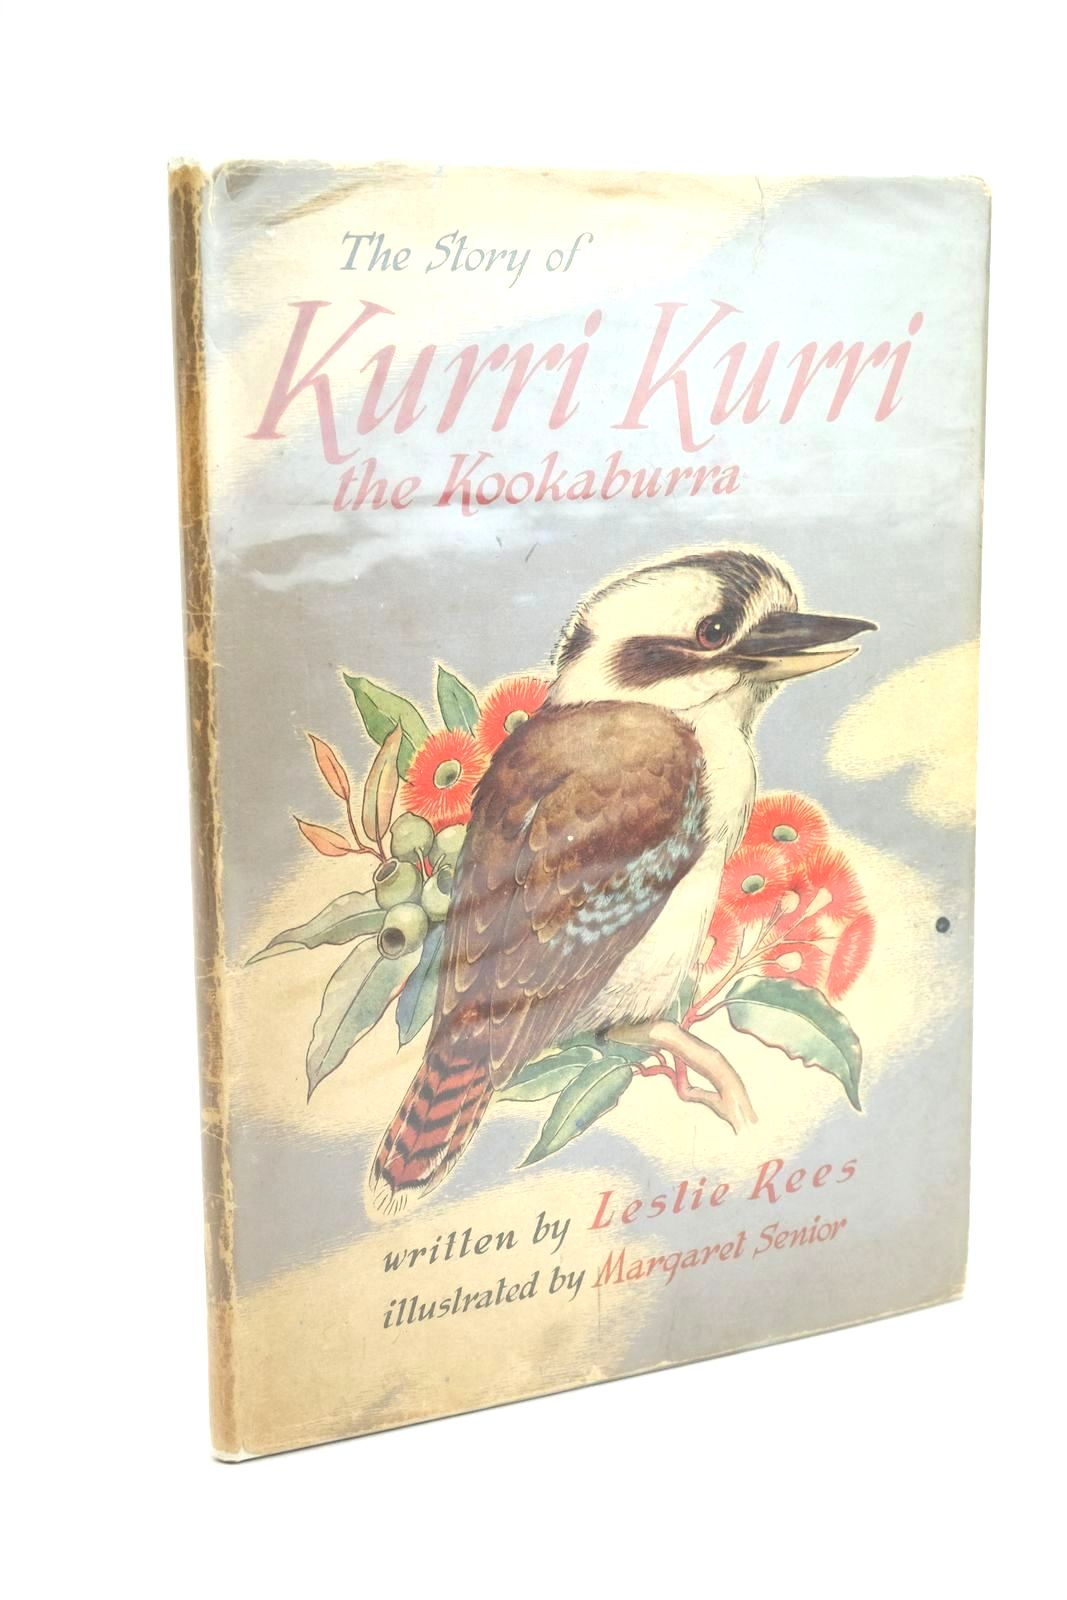 Photo of THE STORY OF KURRI KURRI THE KOOKABURRA written by Rees, Leslie illustrated by Senior, Margaret published by John Sands Pty. Ltd. (STOCK CODE: 1323479)  for sale by Stella & Rose's Books